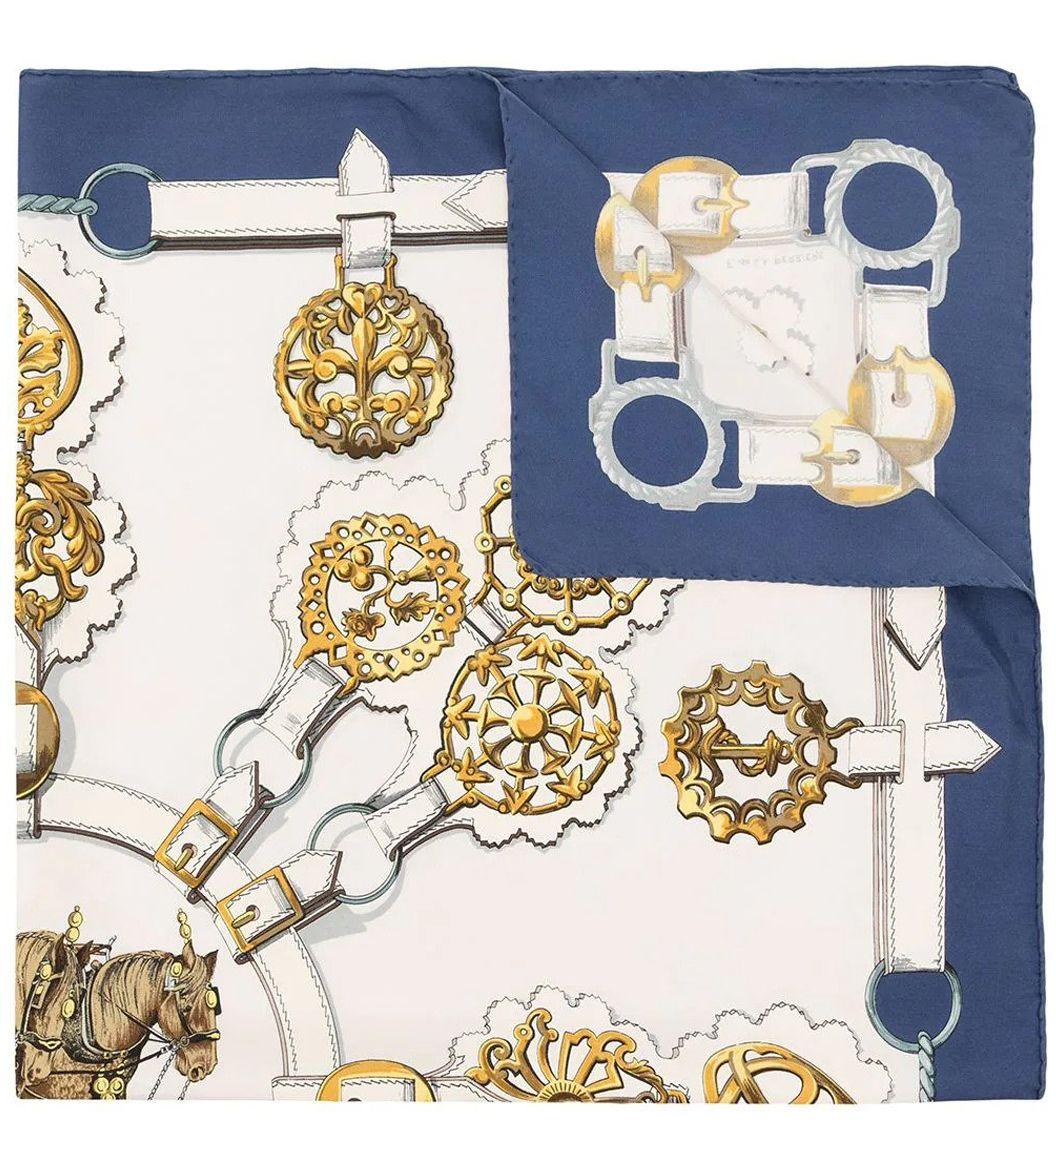 Crafted in France from the finest yellow silk, this pre-owned scarf by Hermès features lightweight construction, a square shape and print motifs. Designed by Françoise De La Perriere for Hermes and first issued in 1963, this scarf depicts an